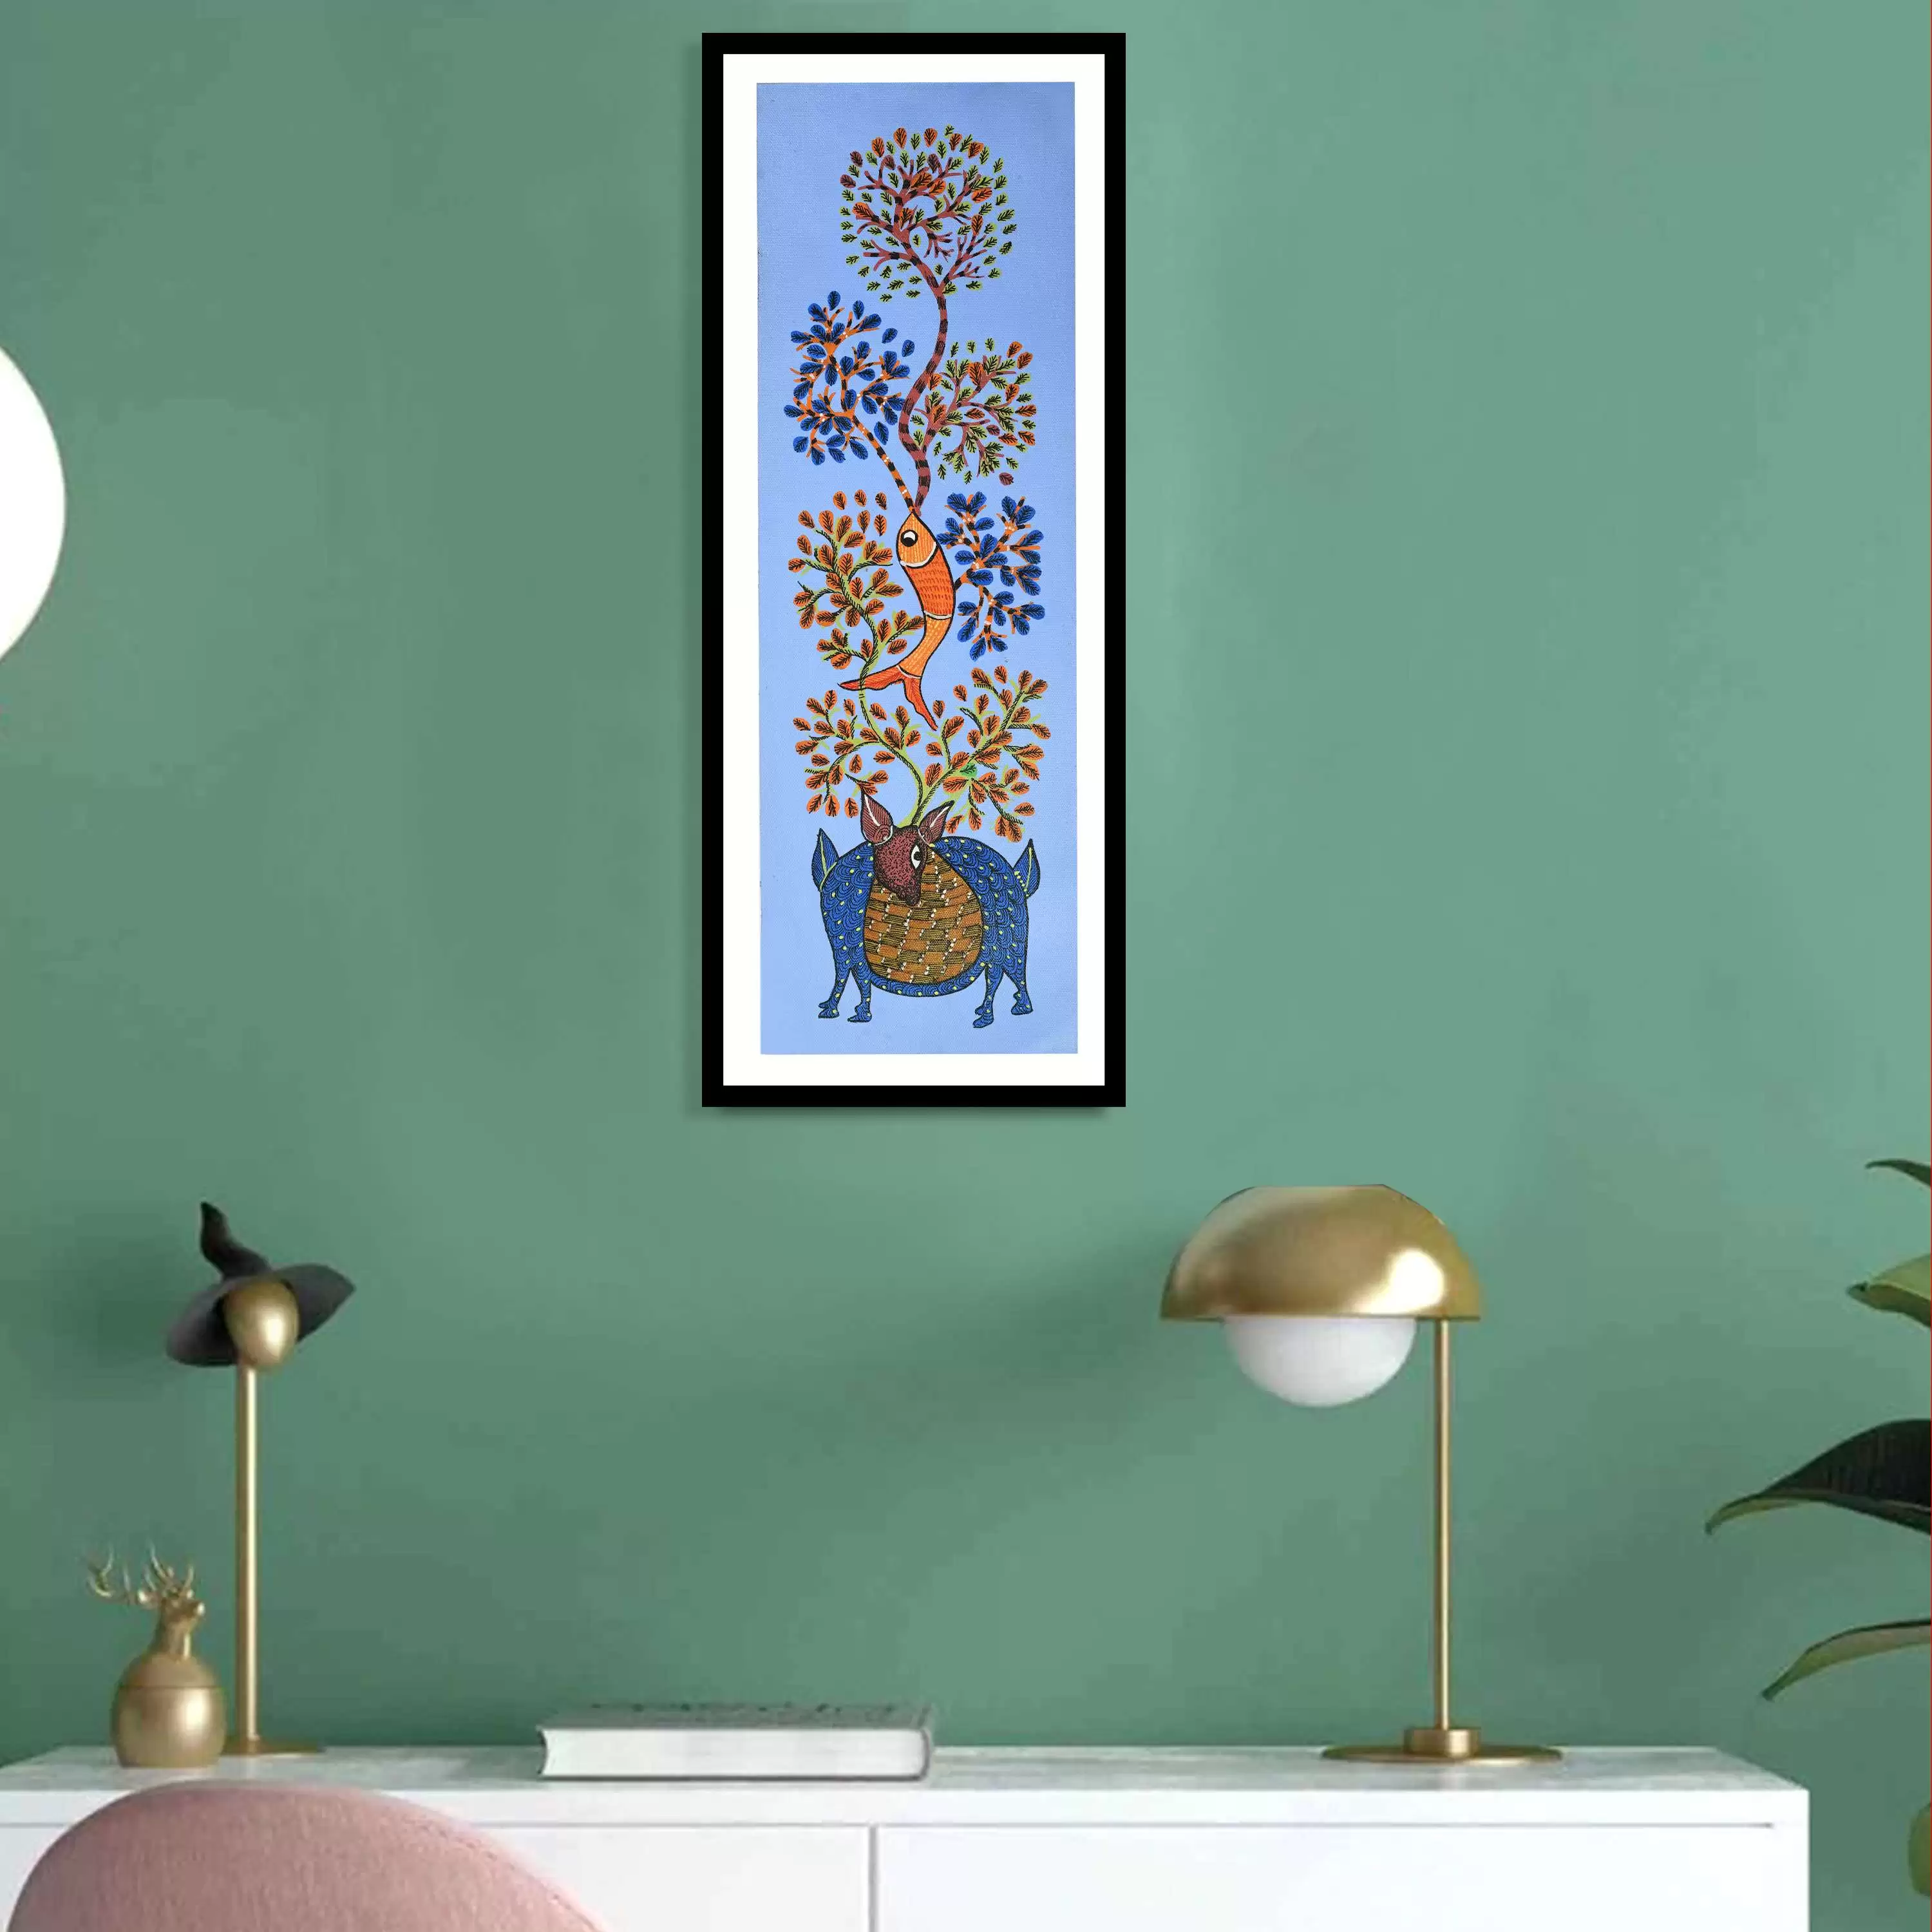 Deer, Fish & Tree Gond Art Painting for Home Wall Art Decor